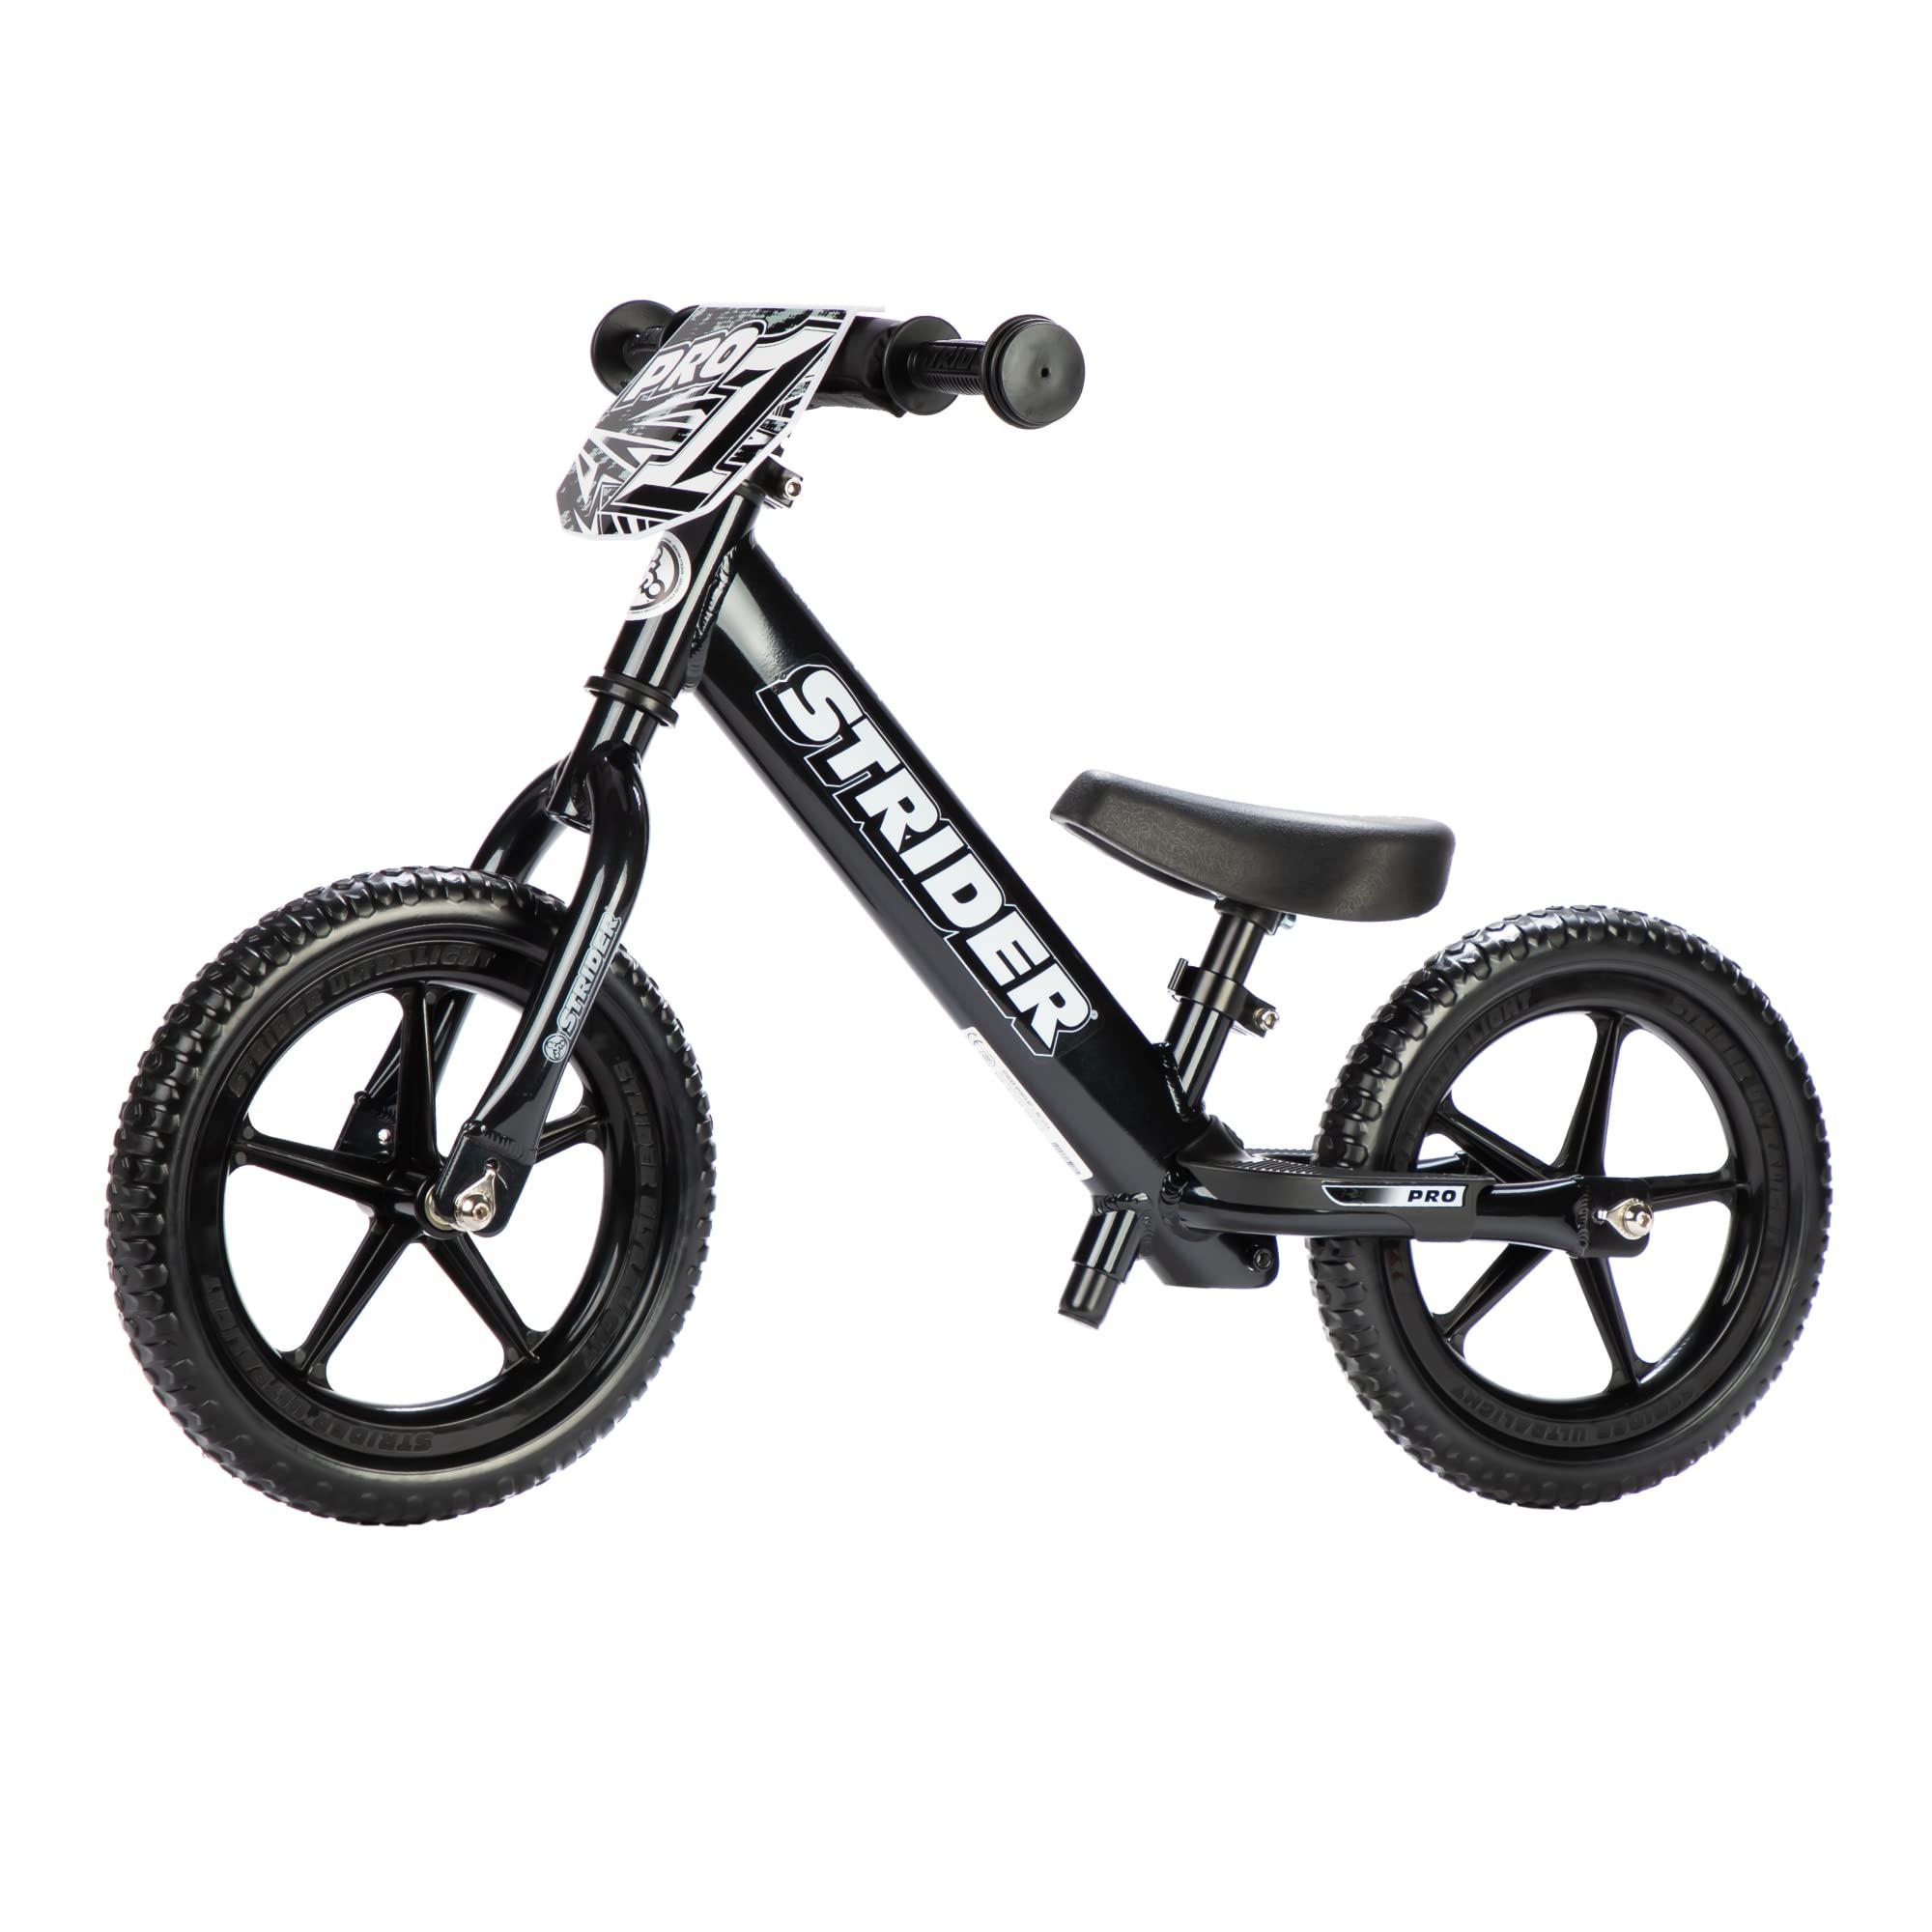 strider - 12 pro kids balance bike, no pedal training bicycle, lightweight frame, flat-free tires, for toddlers and children 